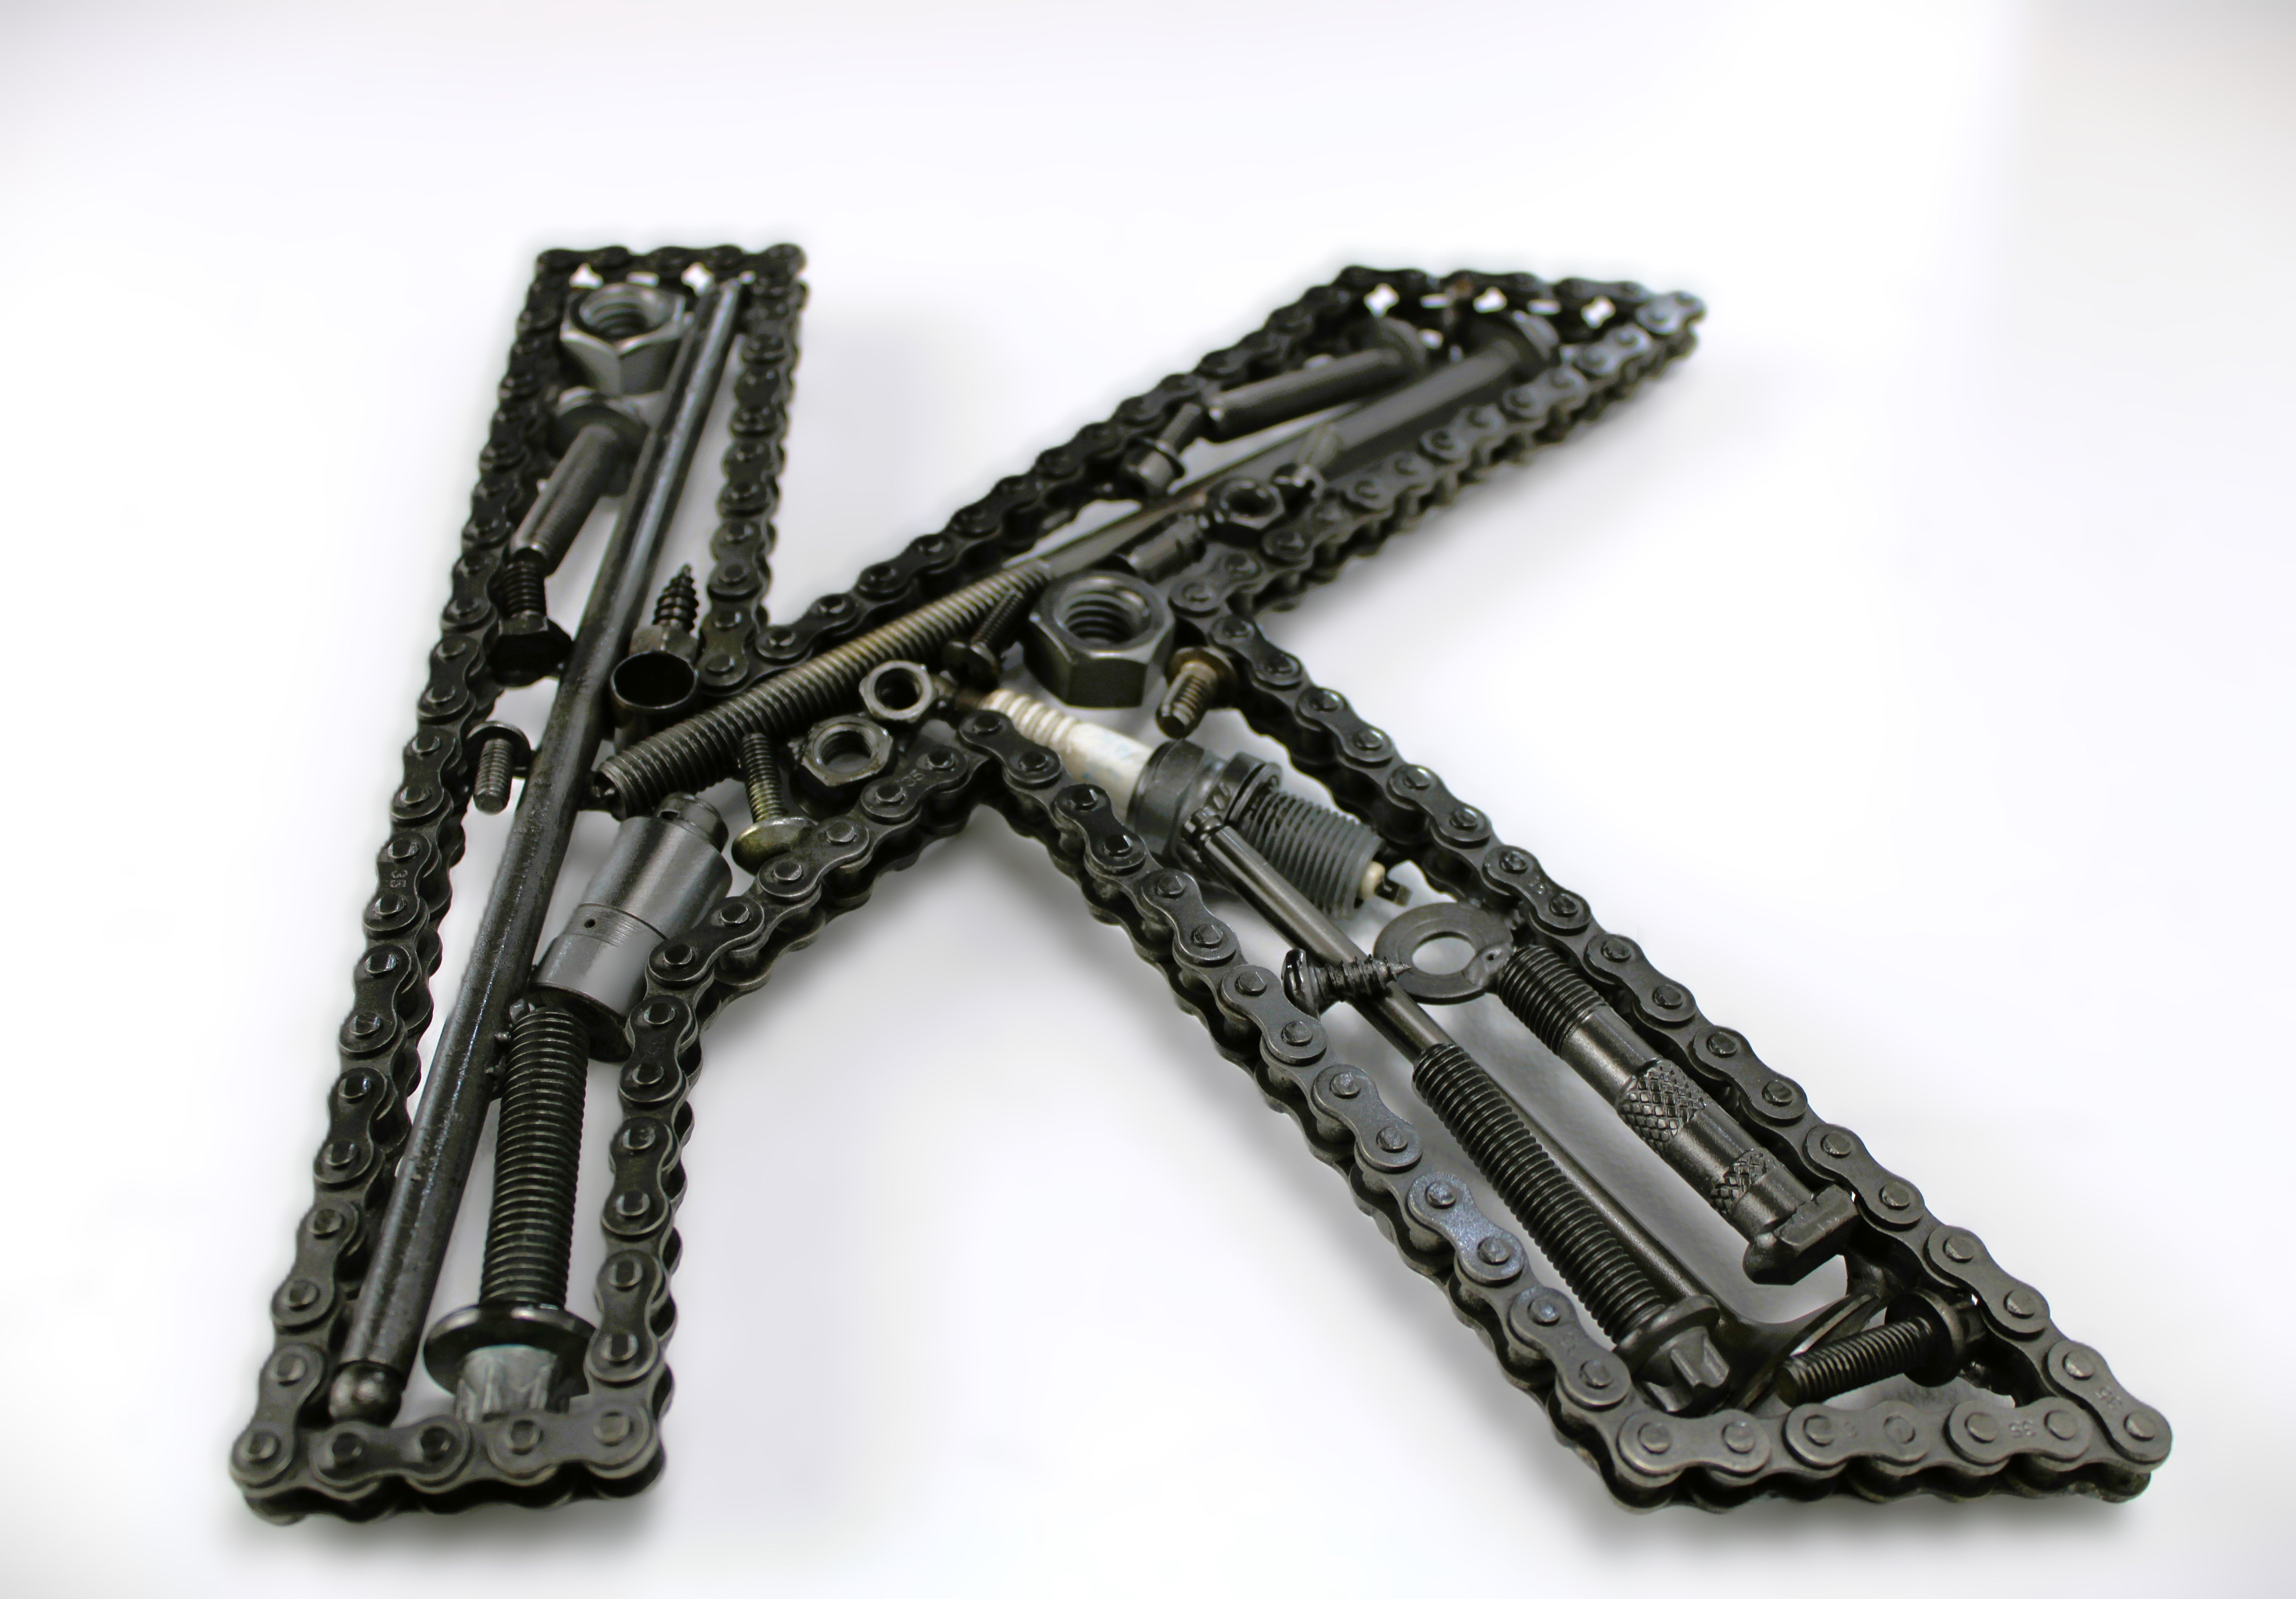 Close-up view of a letter K made out of real car parts, outlined with a timing chain.